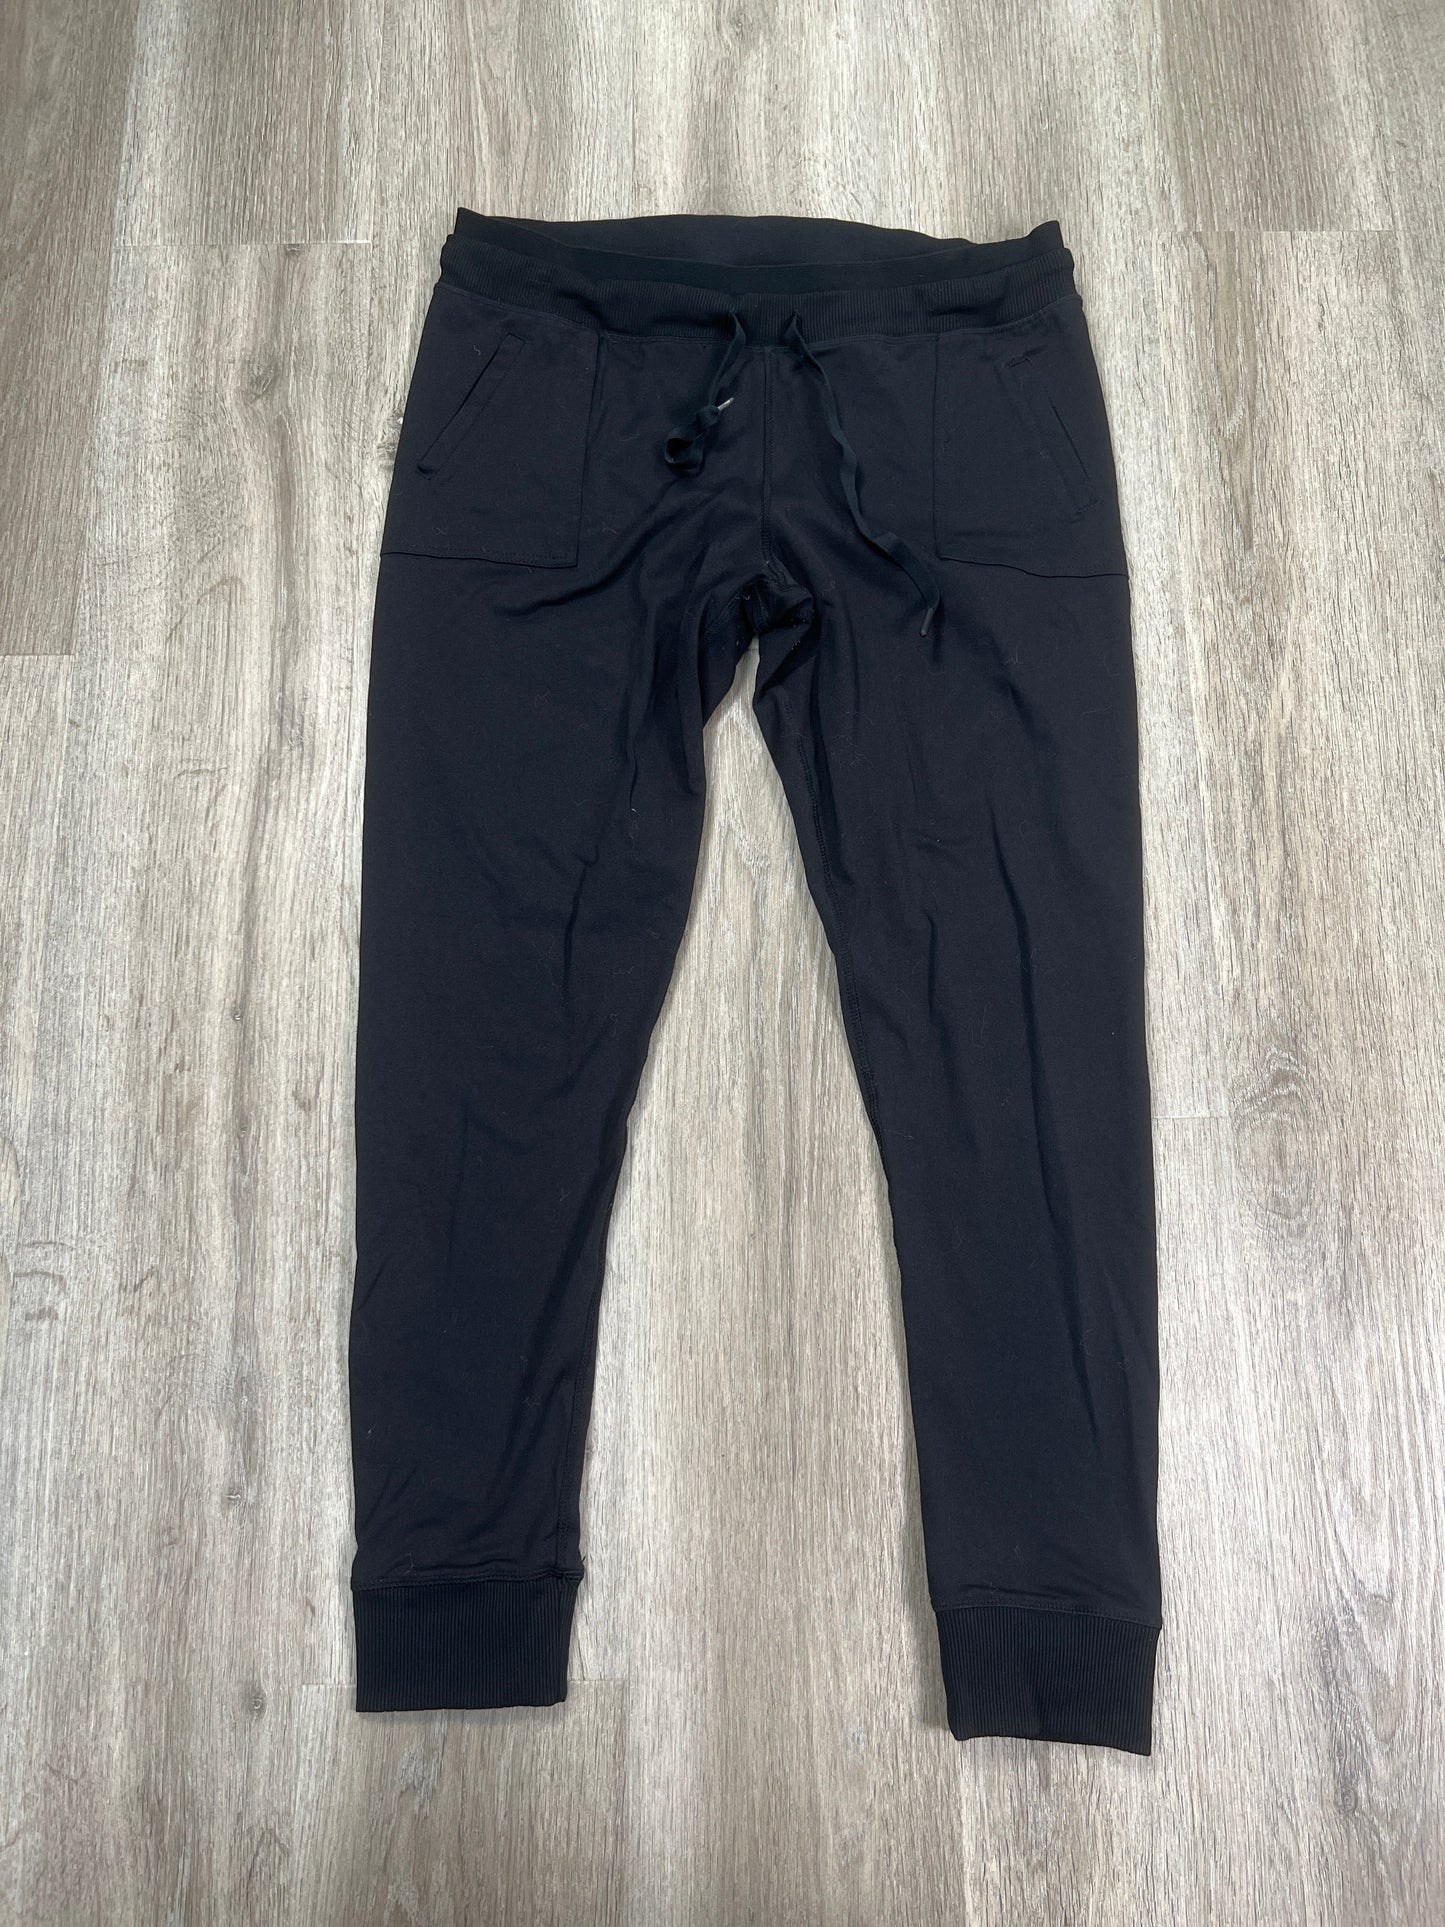 Pants Joggers By Zyia  Size: L